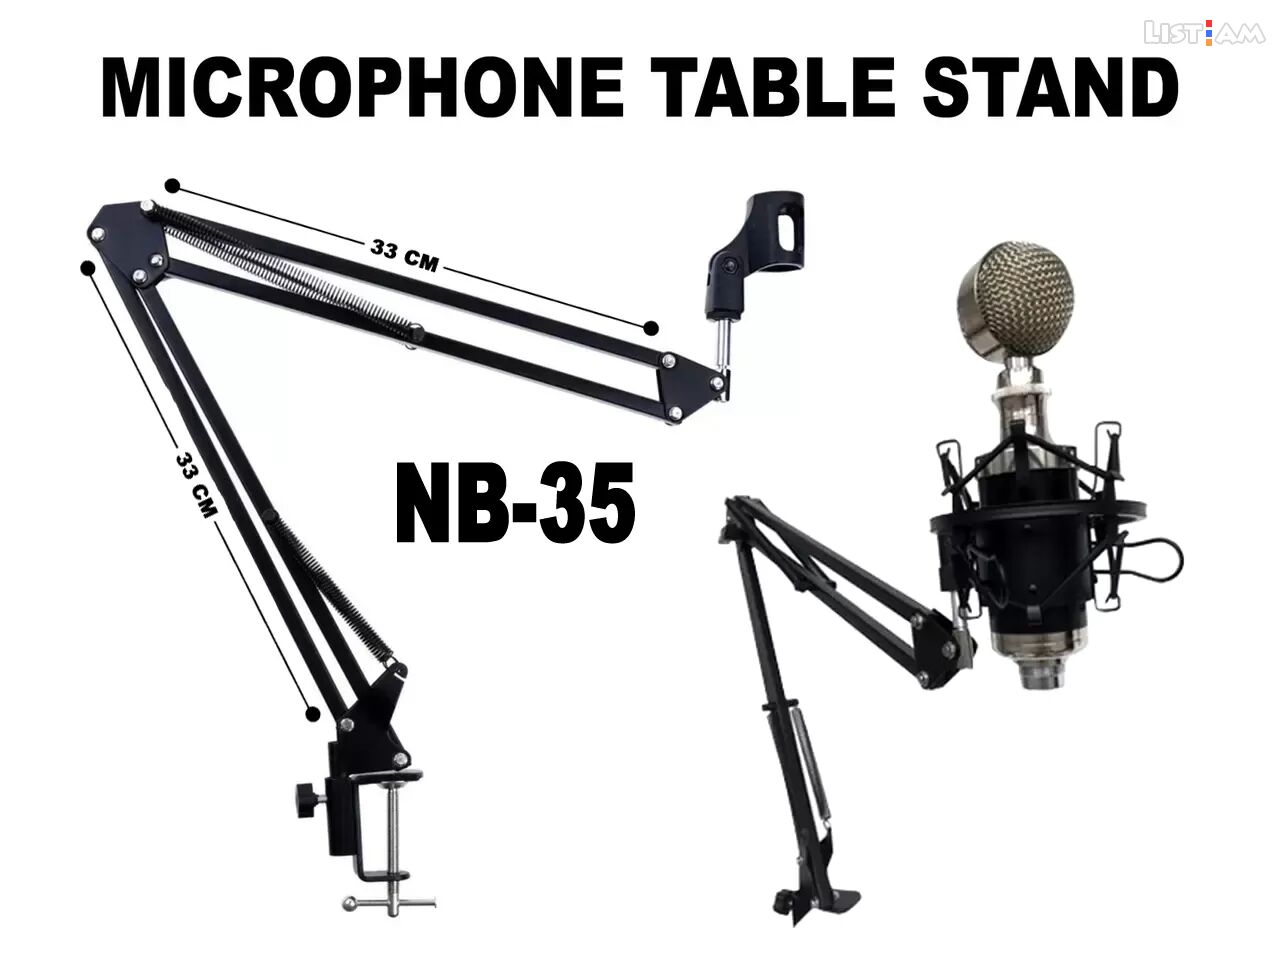 Microphone Table